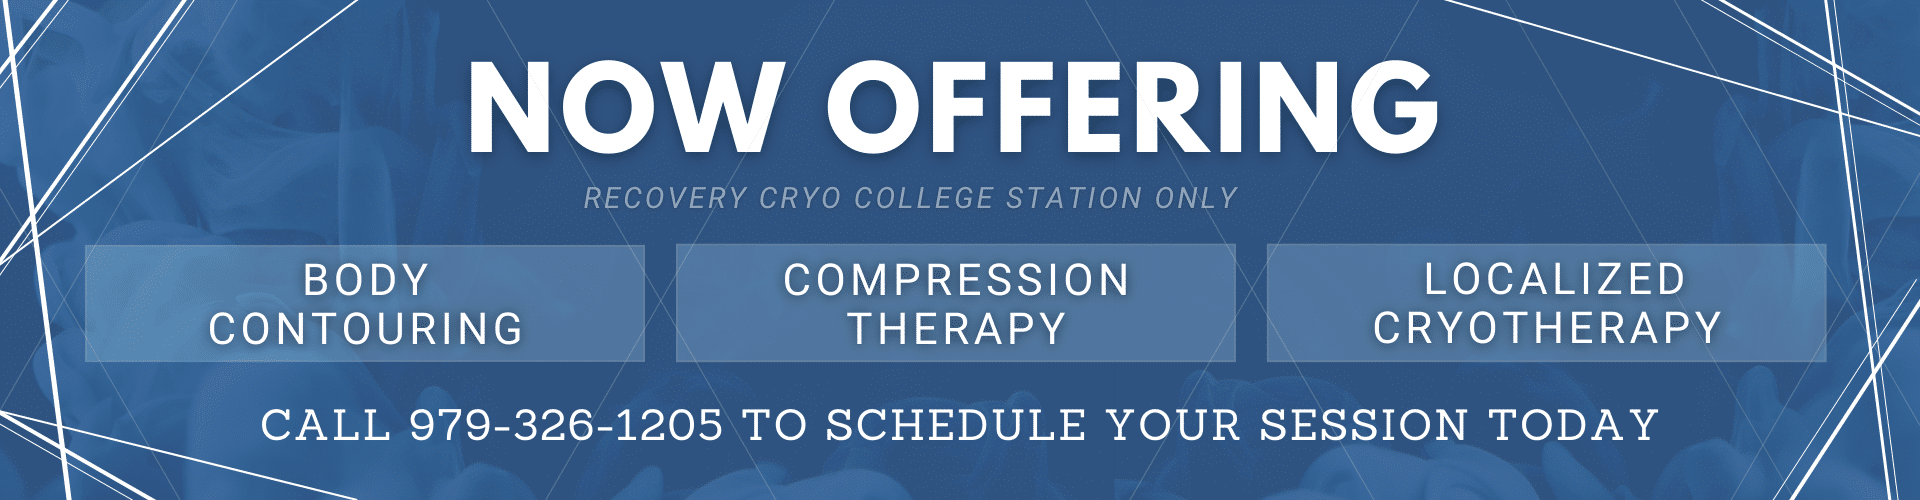 Now Offering at College Station Recovery Cryo: Body Contouring, Compression Therapy and Localized Cryotherapy!